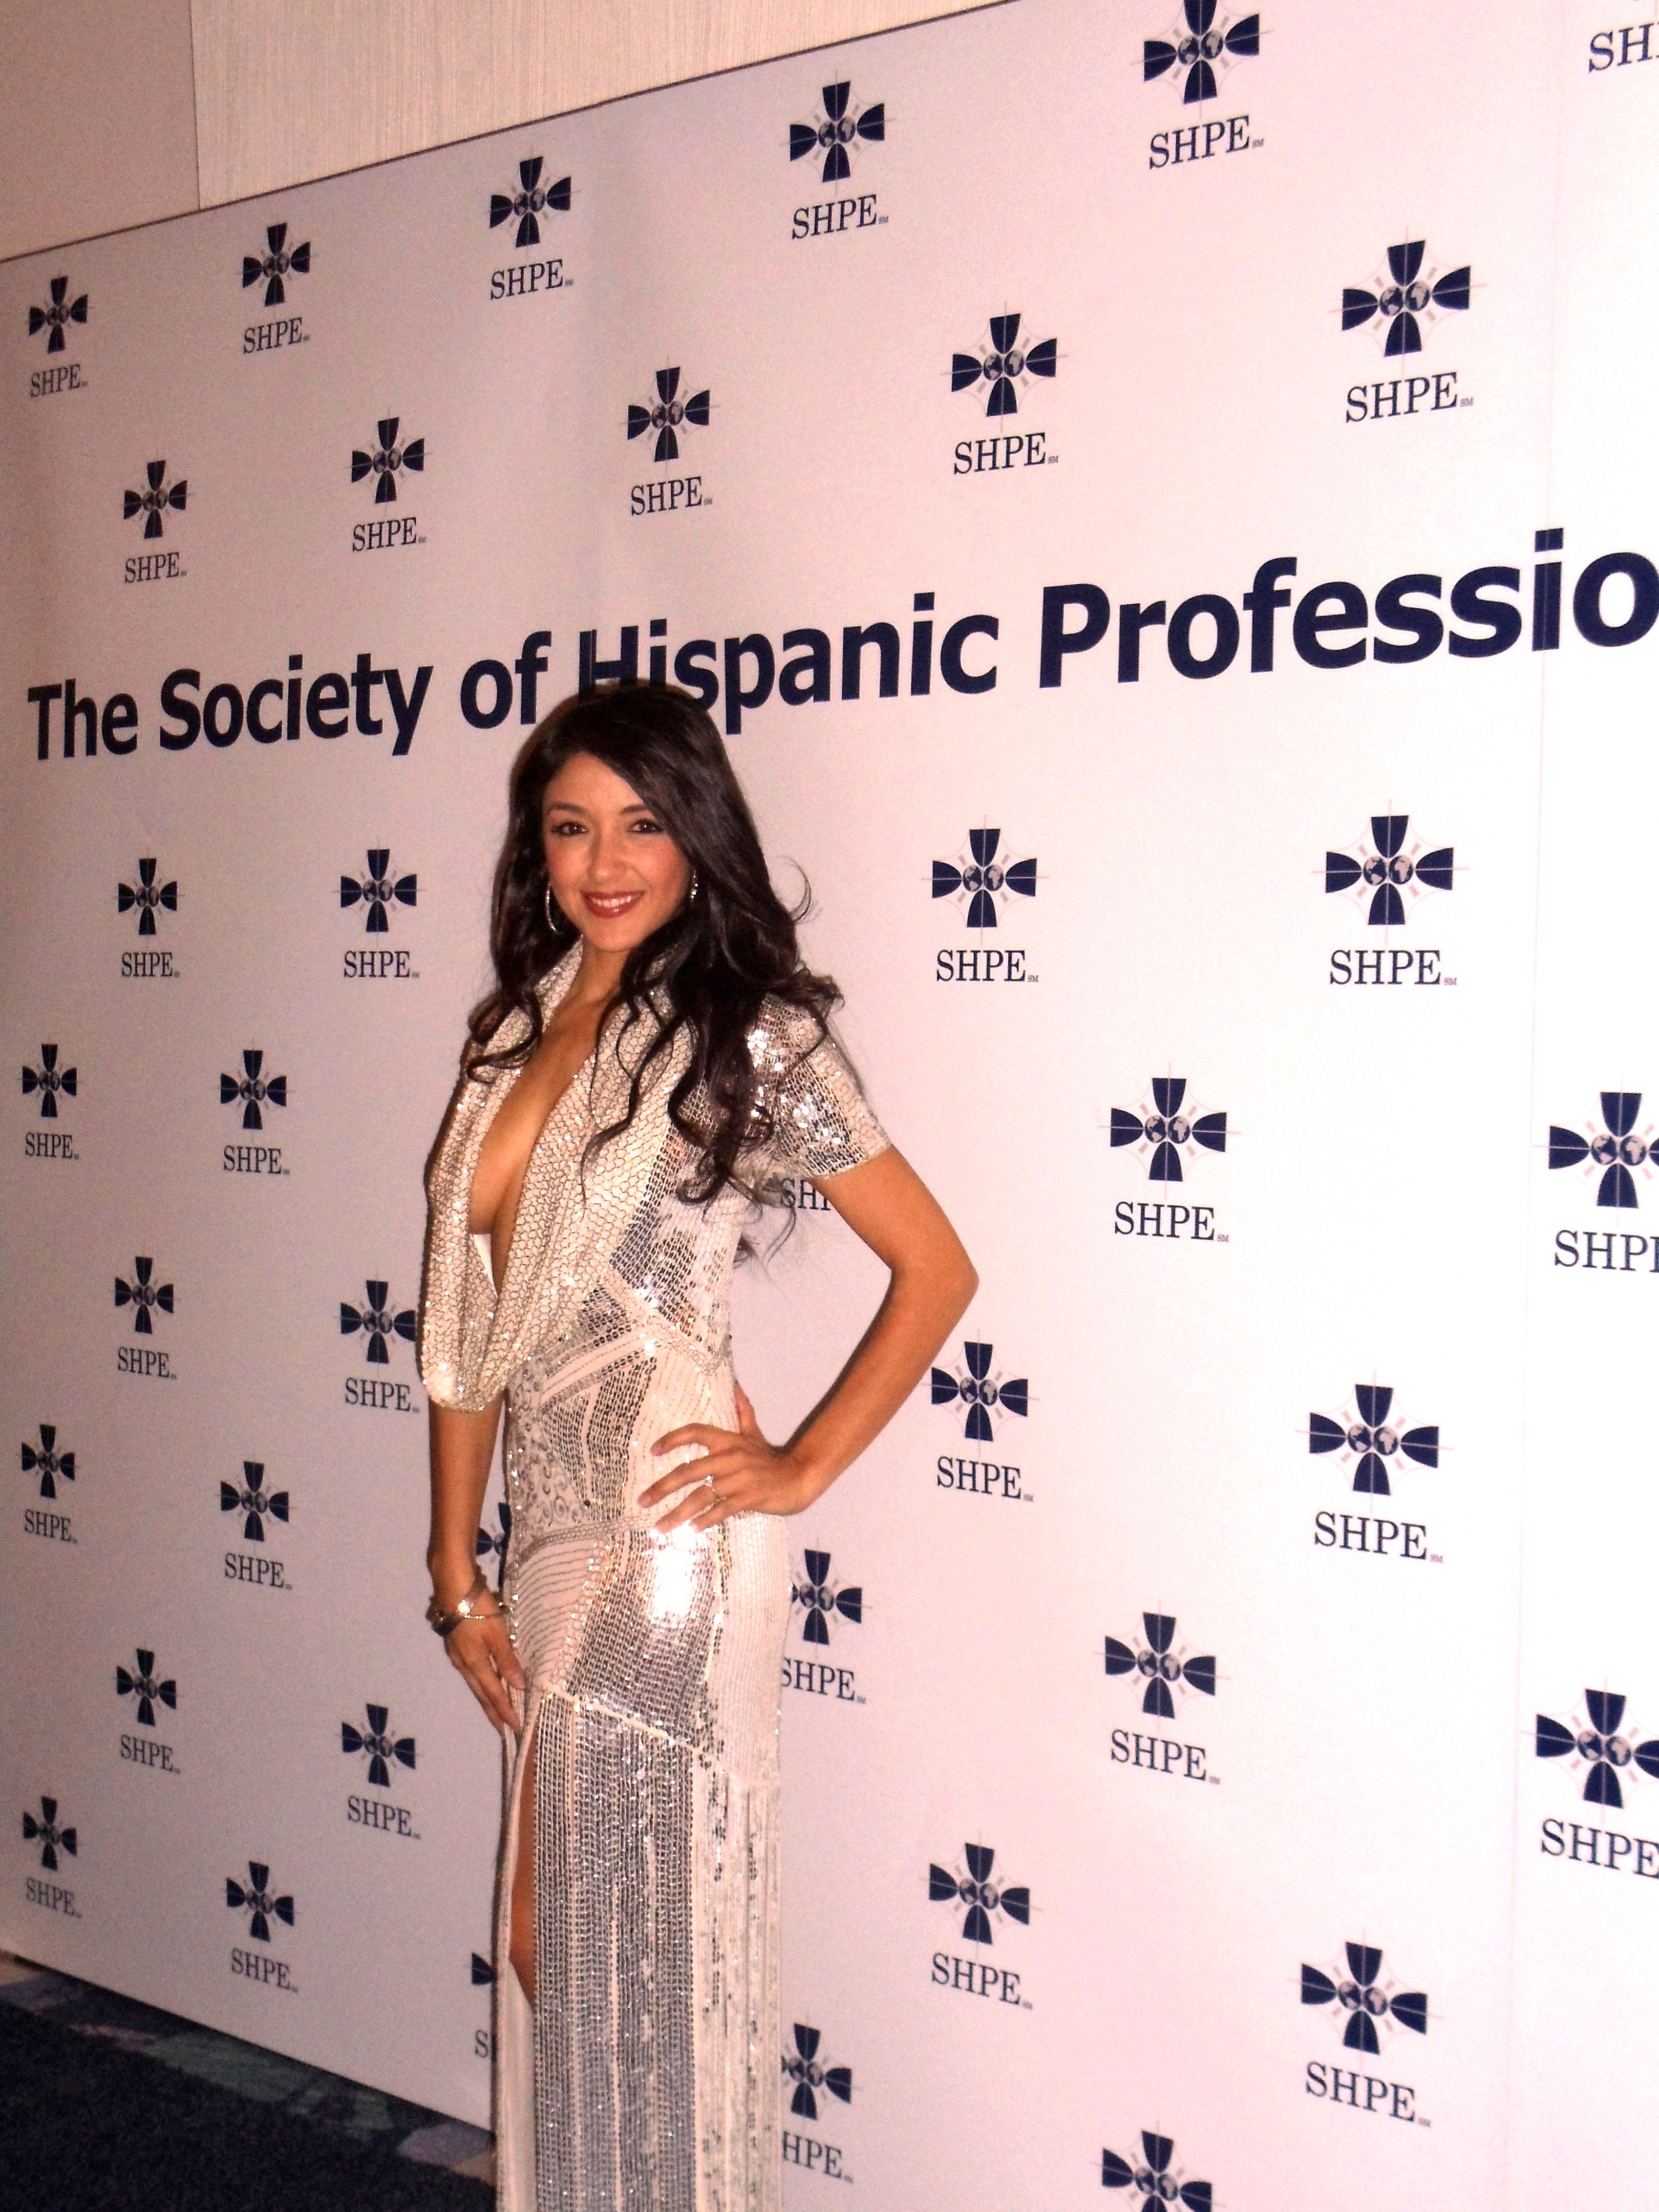 Actress YVETTE YATES arriving to present the STAR AWARDS at the SHPE Conference 2011, Anaheim Convention Center. (SHPE- Society of Hispanic Professional Engineers)